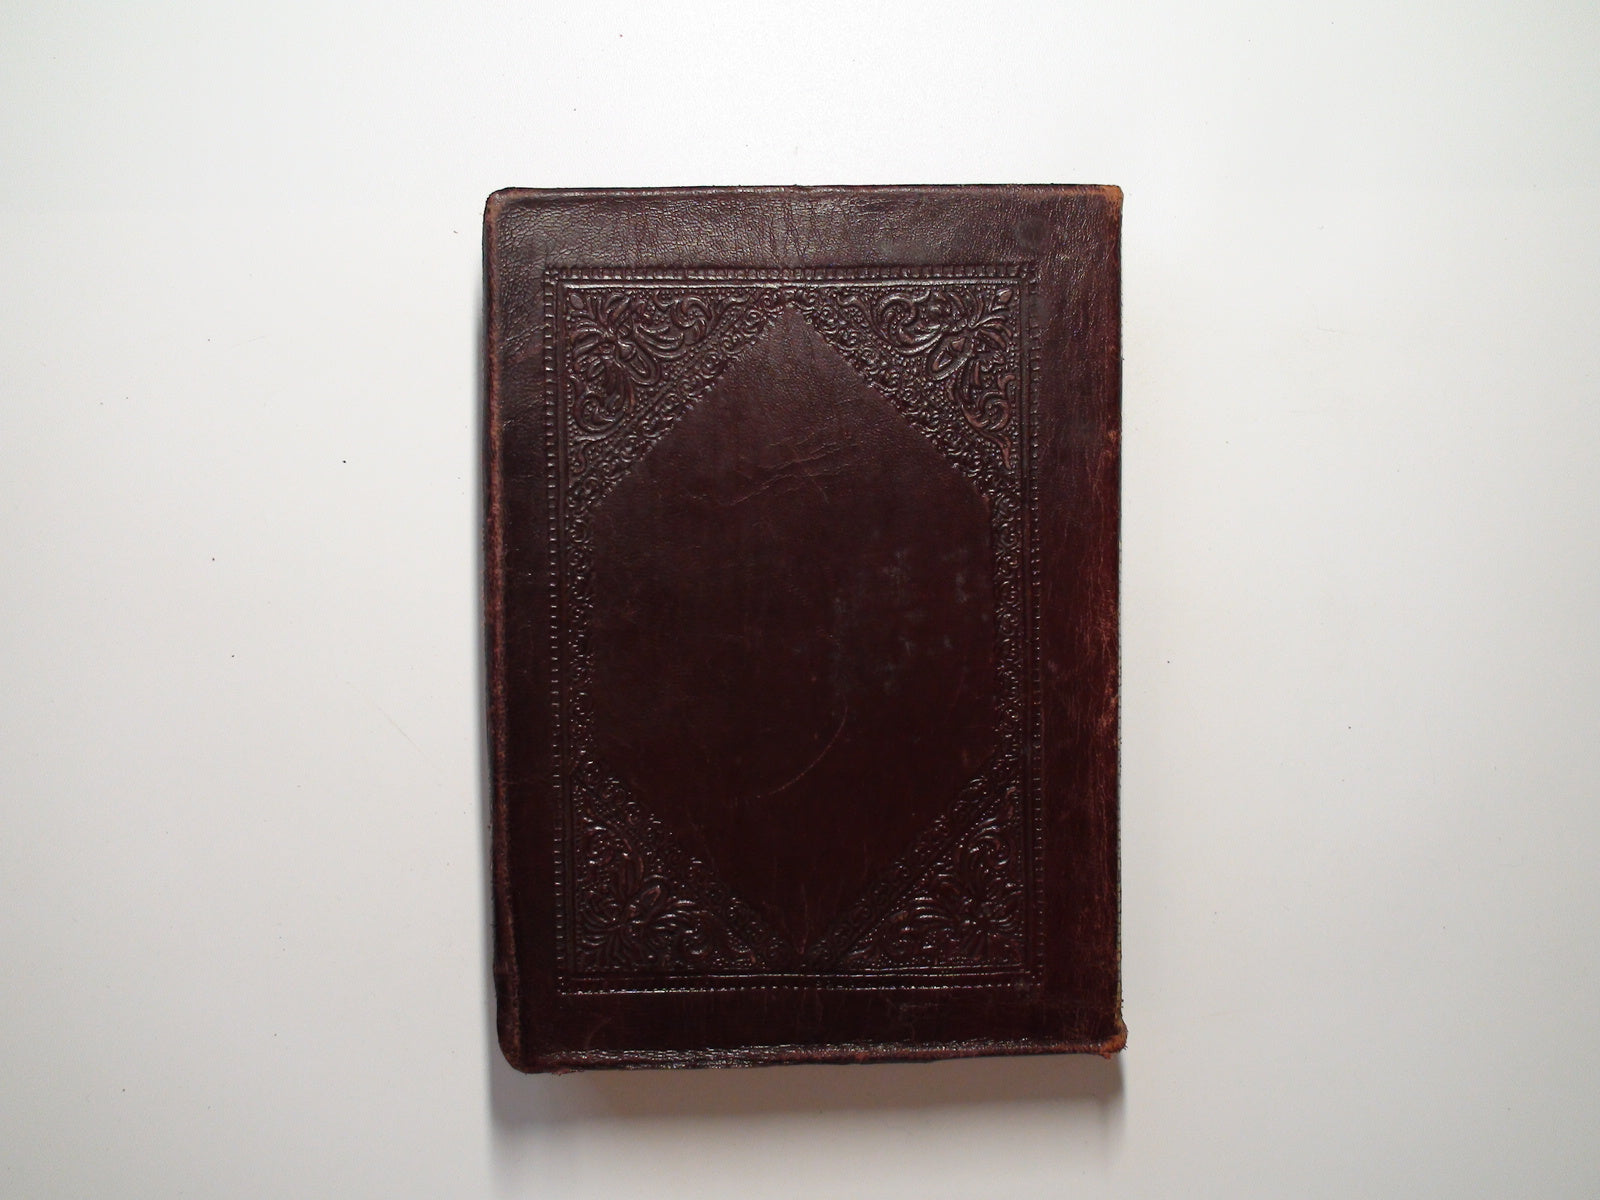 The Decameron of Giovanni Boccaccio, Translated by Payne, Leather, Rare, c1920s